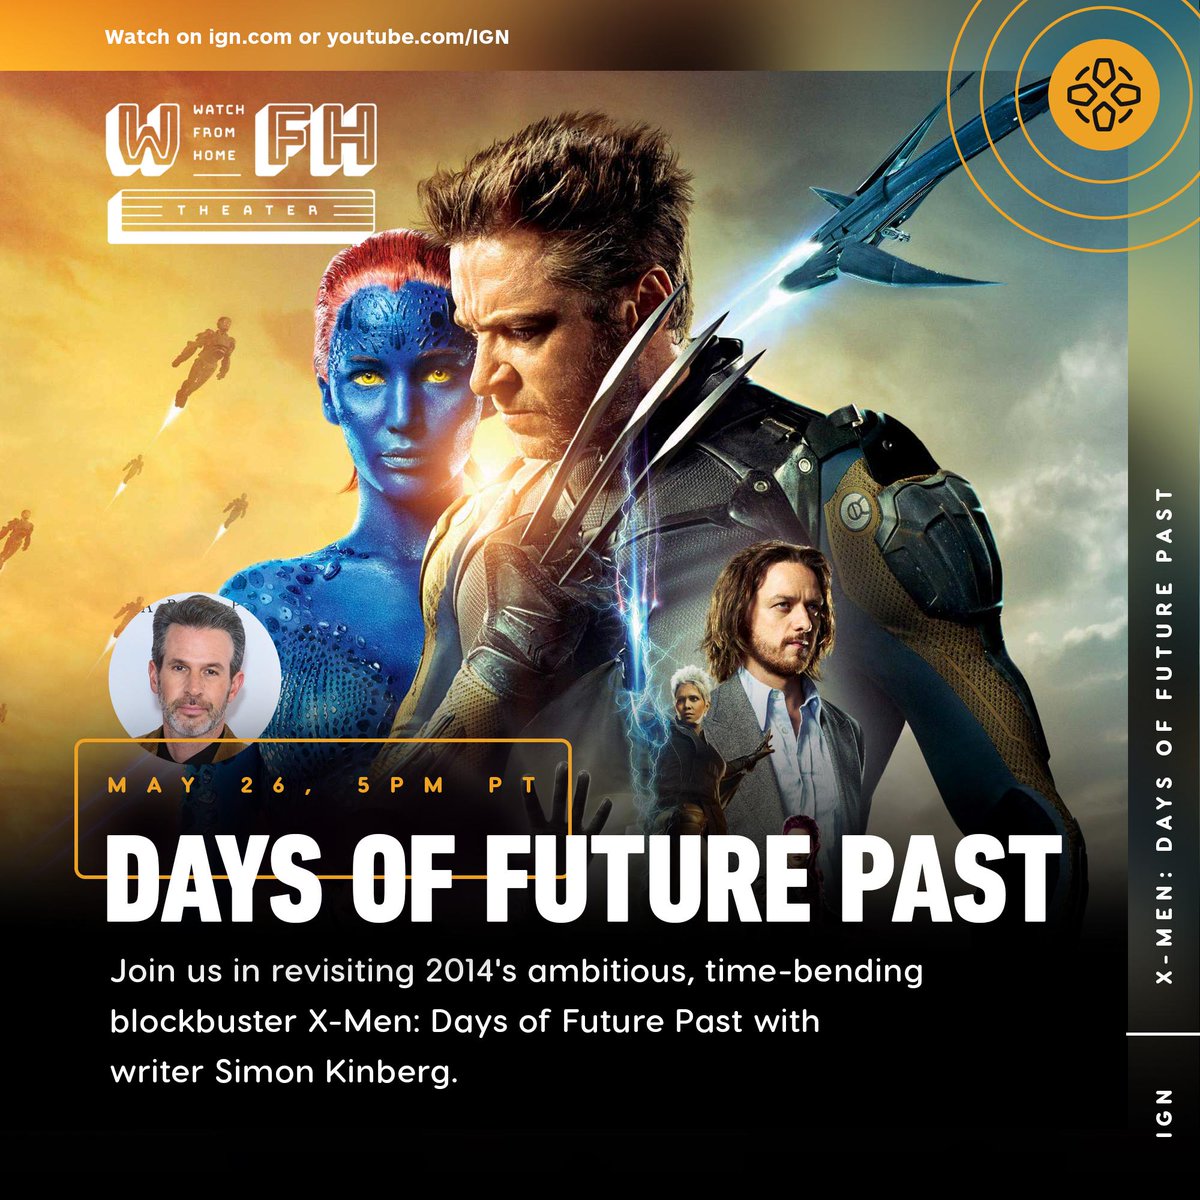 We’re live now with X-Men: Days Of Future Past writer and producer Simon Kinberg to watch along with his modern superhero classic.  #DaysOfFuturePast  #WFHTheater https://bit.ly/2ZAiP3k 